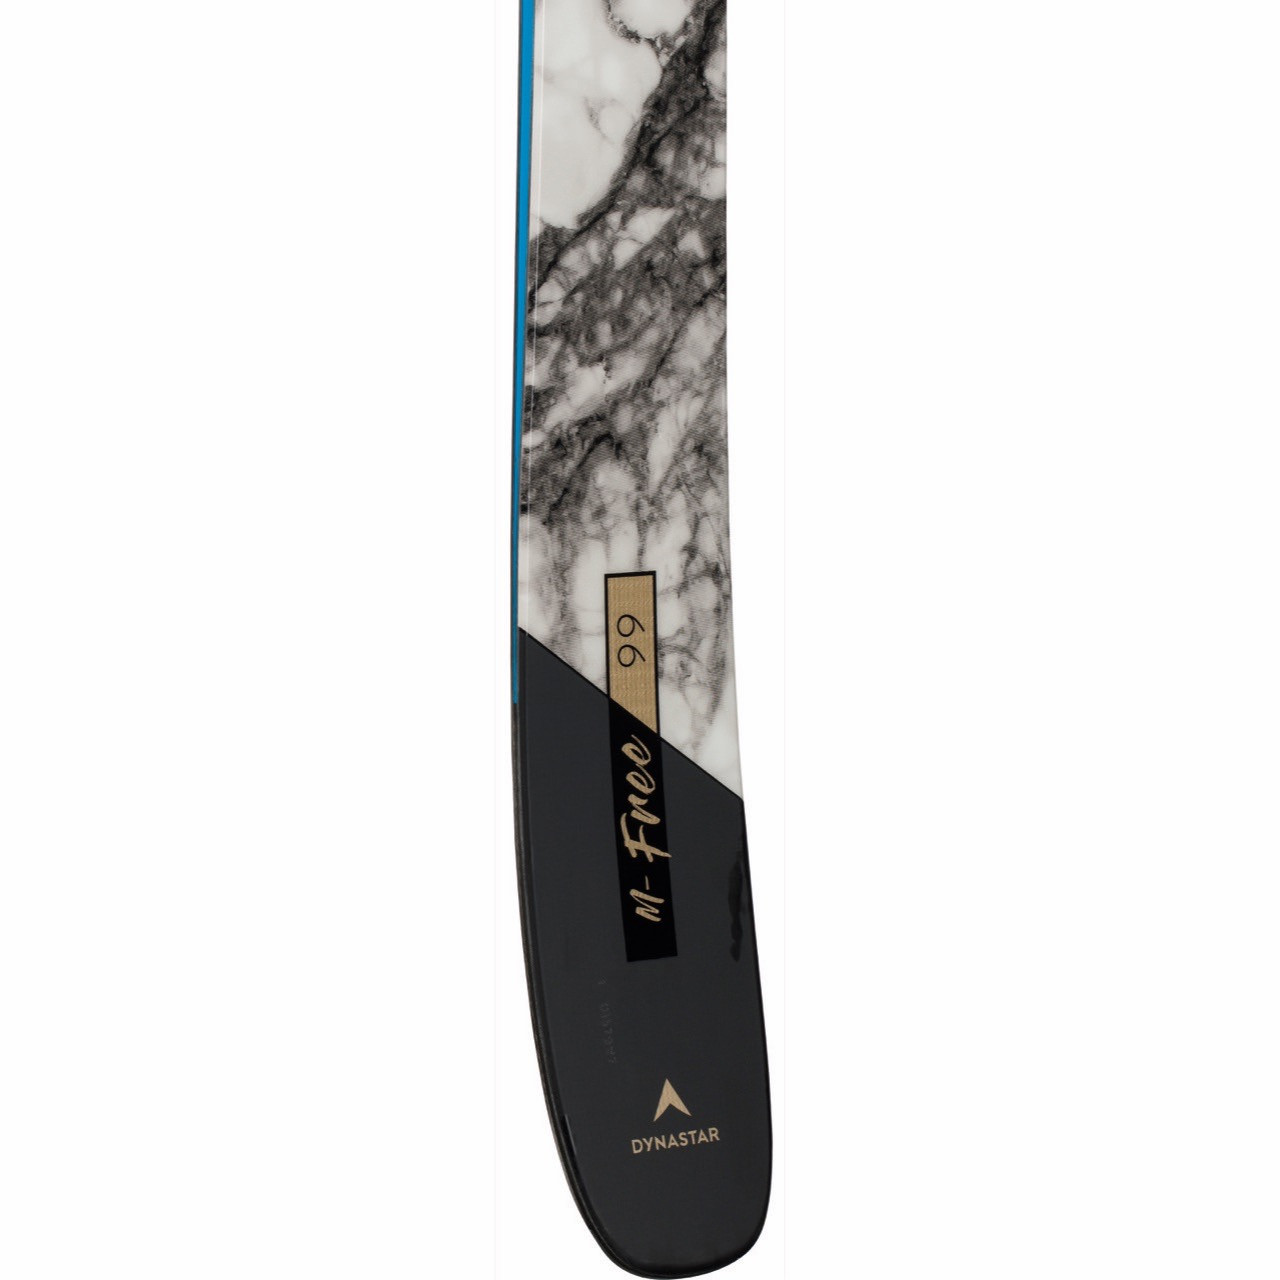 WIN DYNASTAR M-FREE 99 SKIS AND BINDINGS, PLUS LANGE XT3 BOOTS